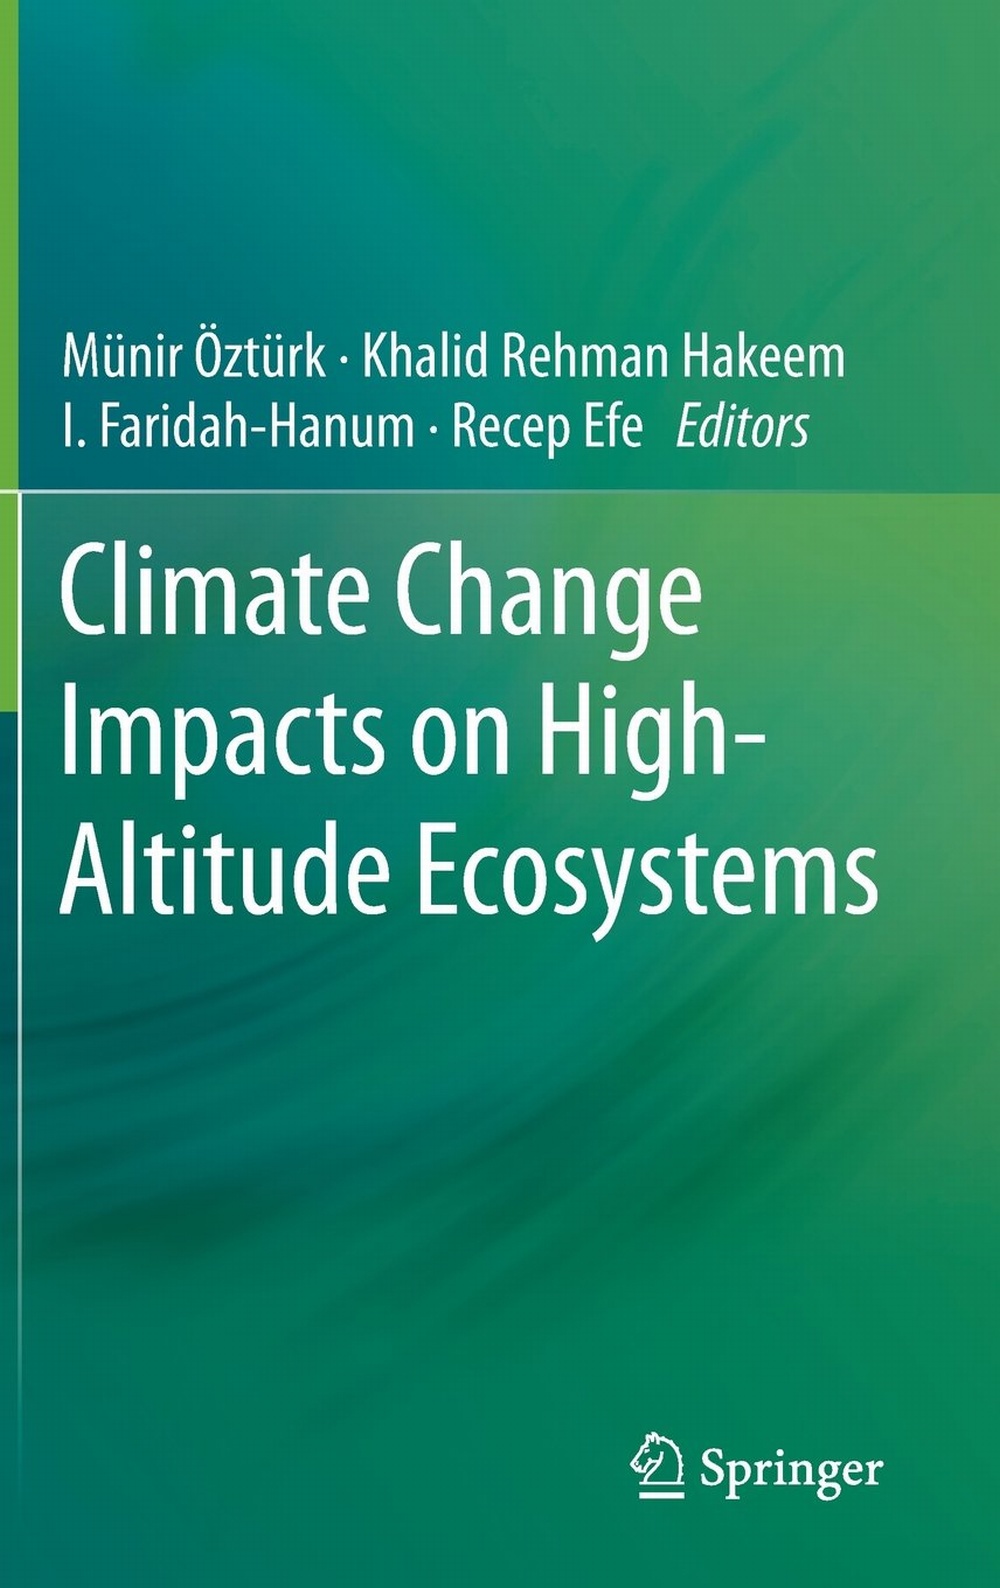 ilker_hoca_climate_change_impacts_on_high_altitude_ecosystems.jpg (258 KB)